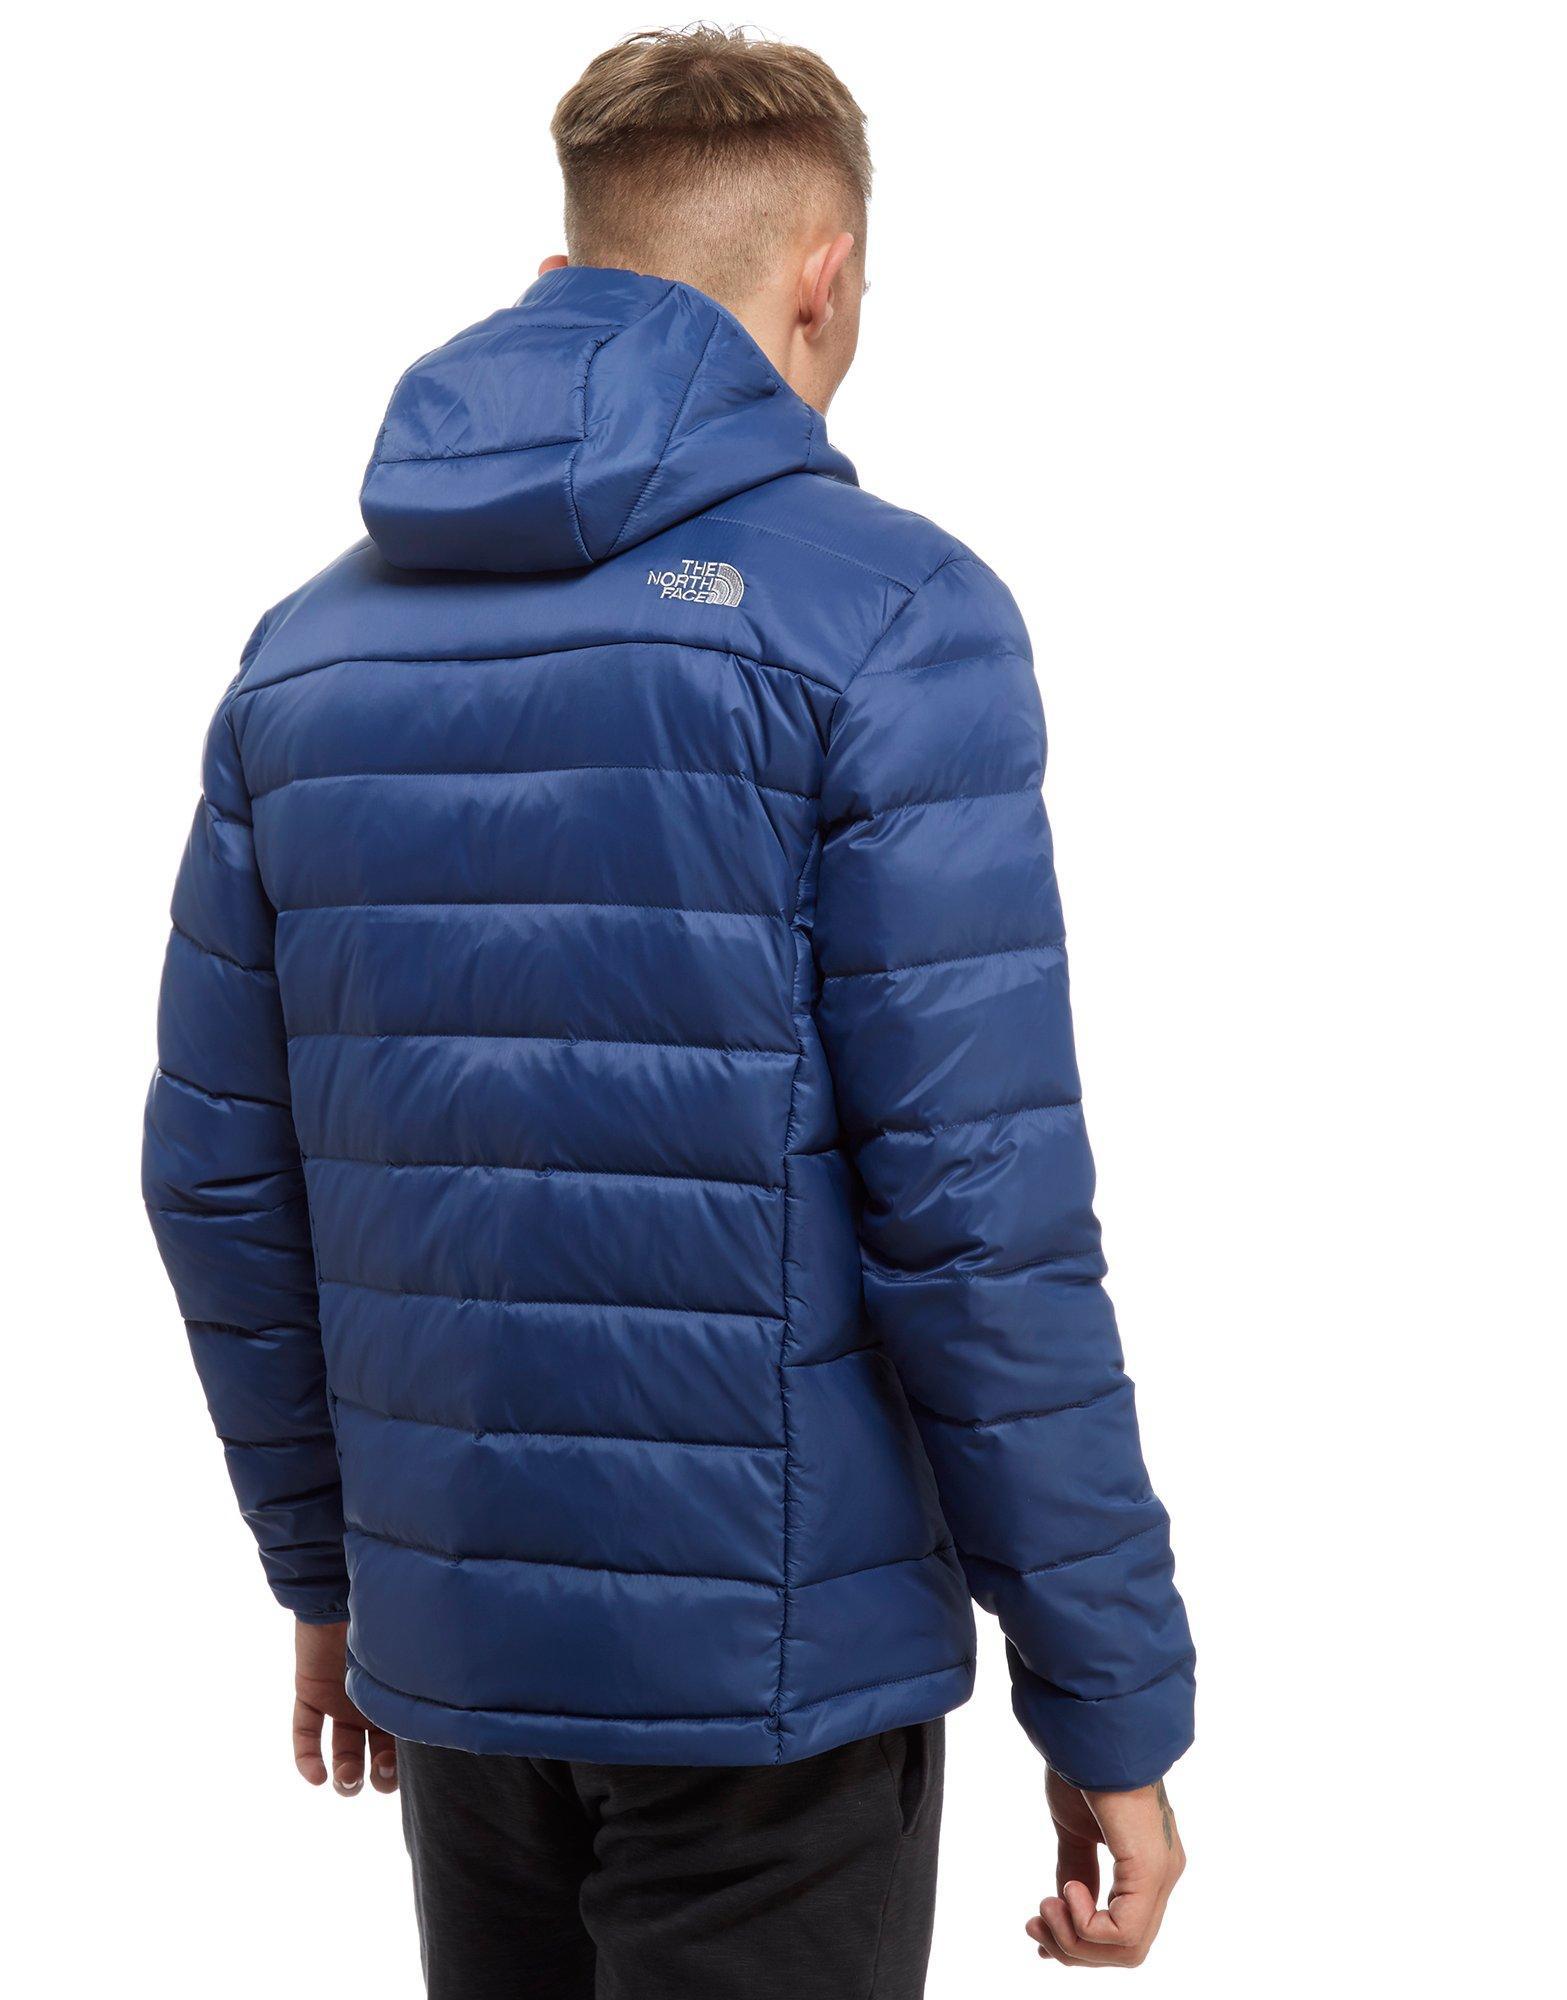 The North Face Synthetic Aconcagua Jacket in Blue for Men - Lyst